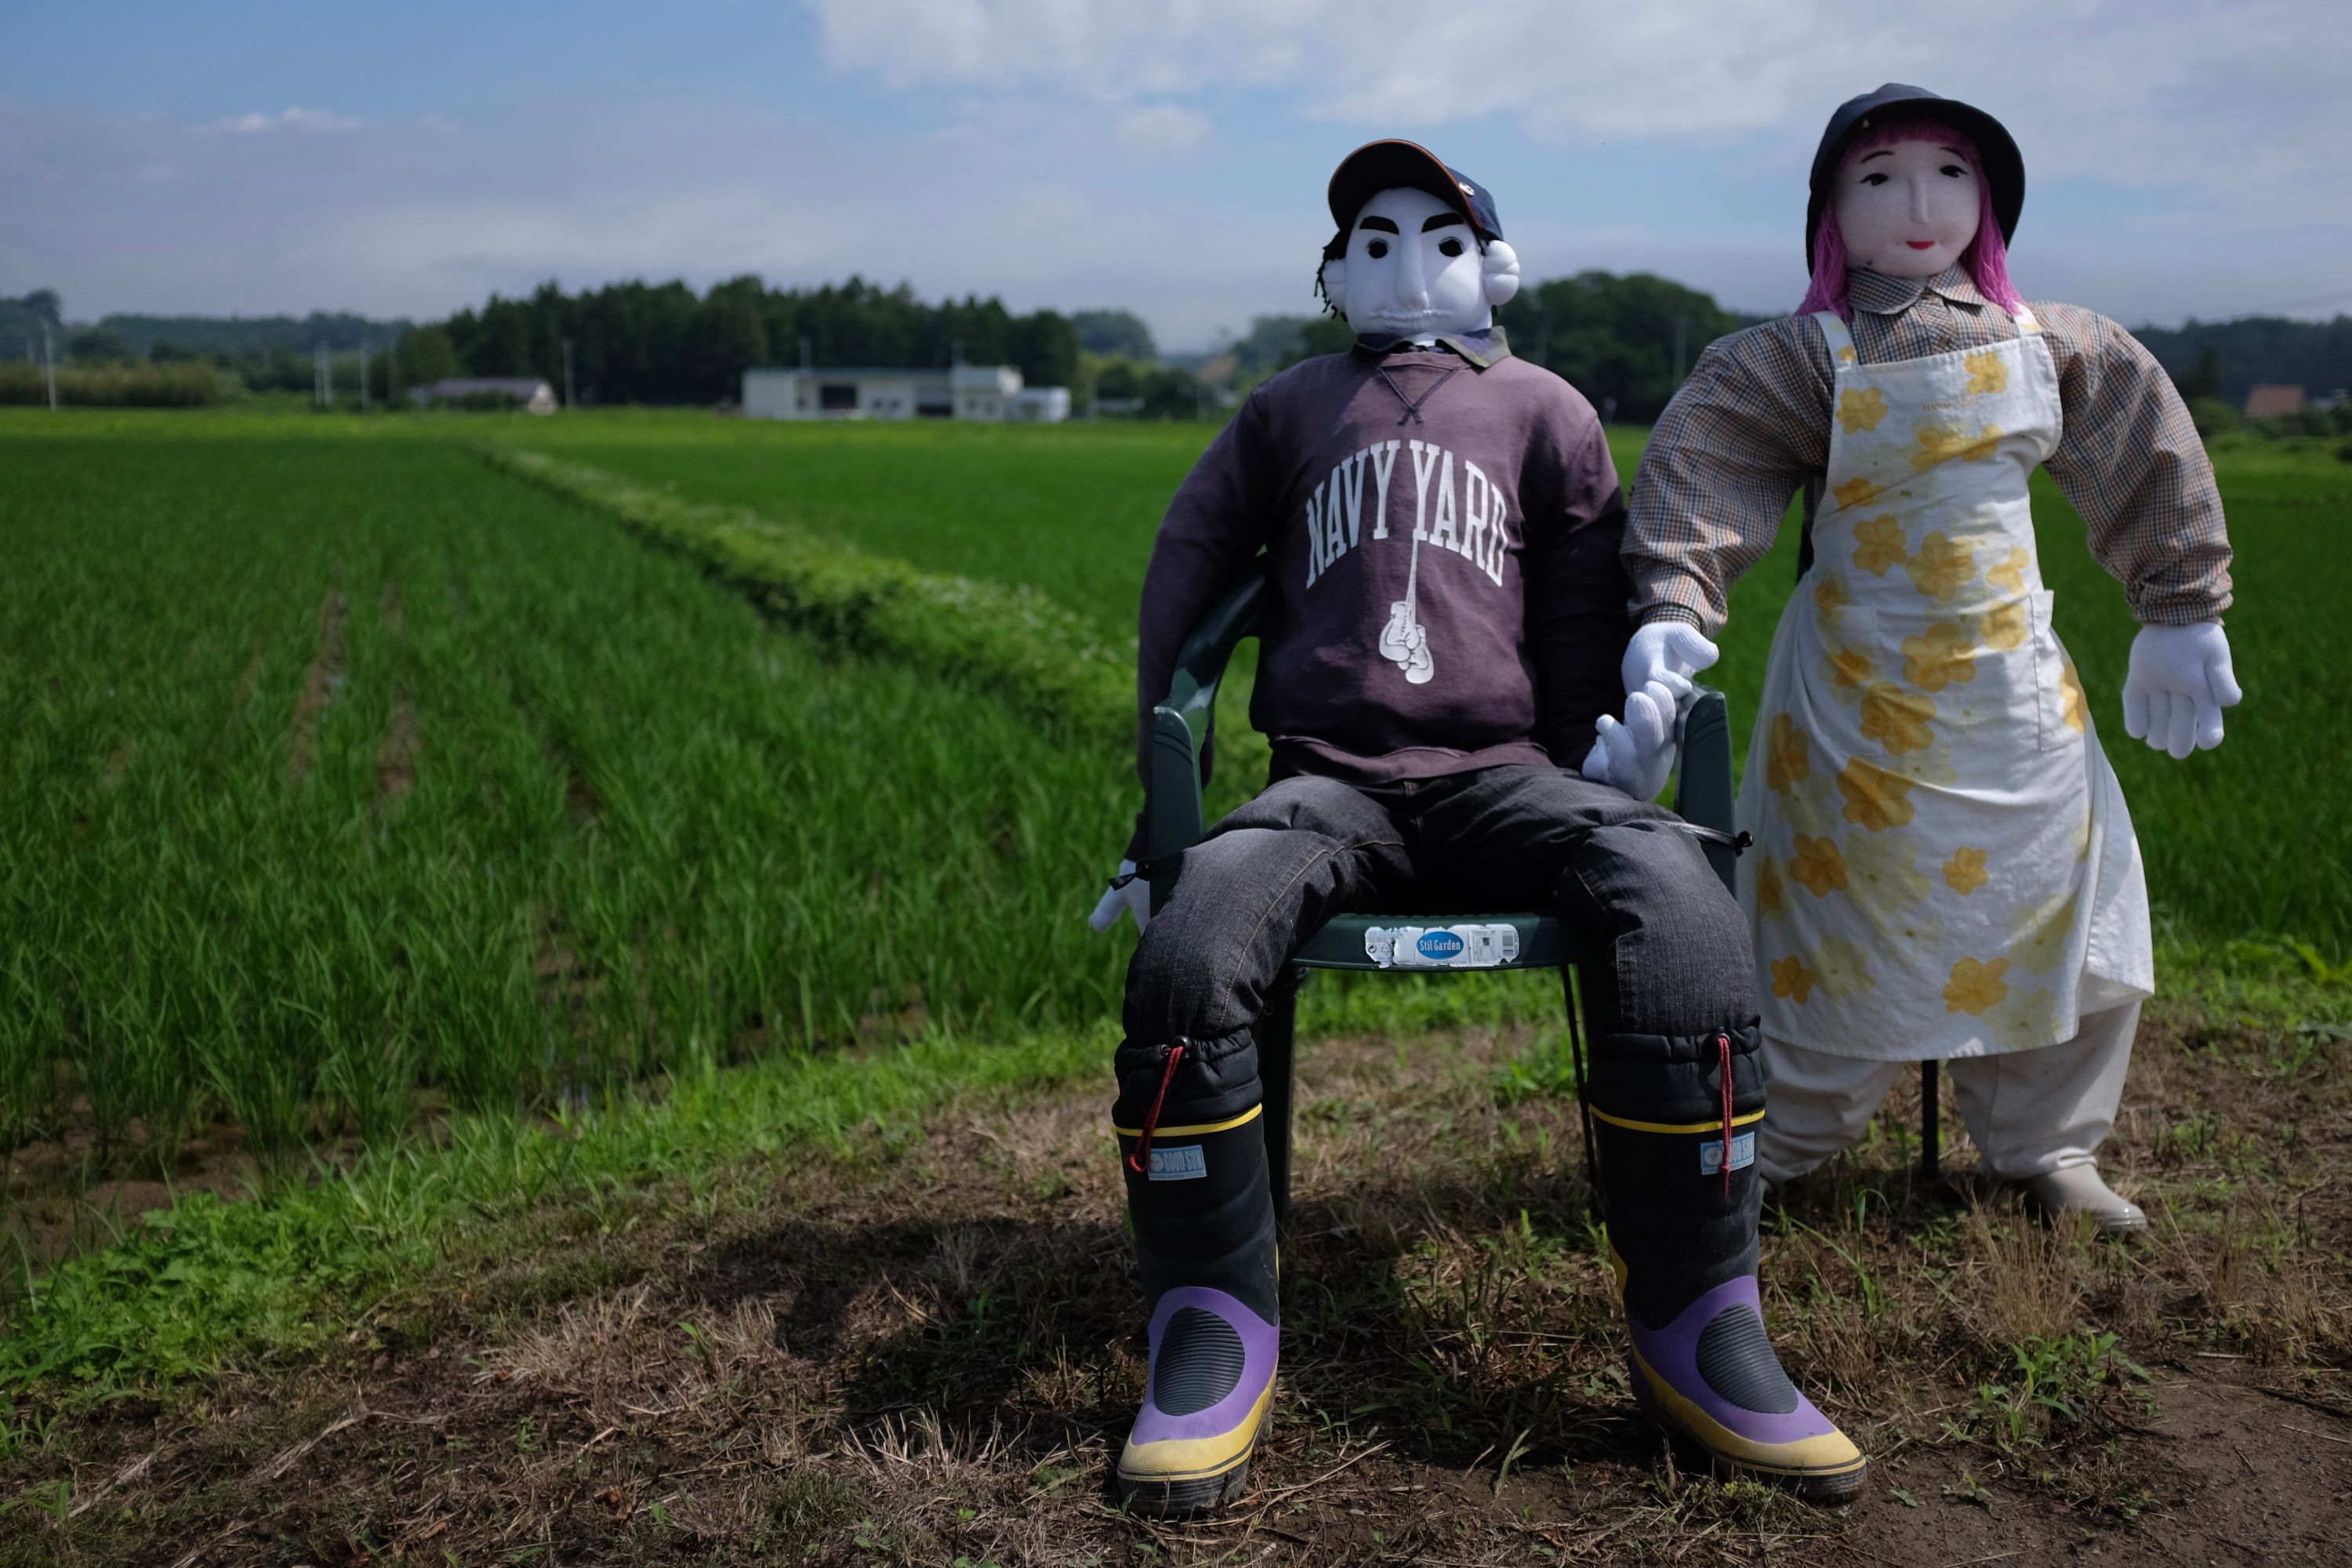 Two human-size dolls, a sitting man and a standing woman, guard one of the fields.